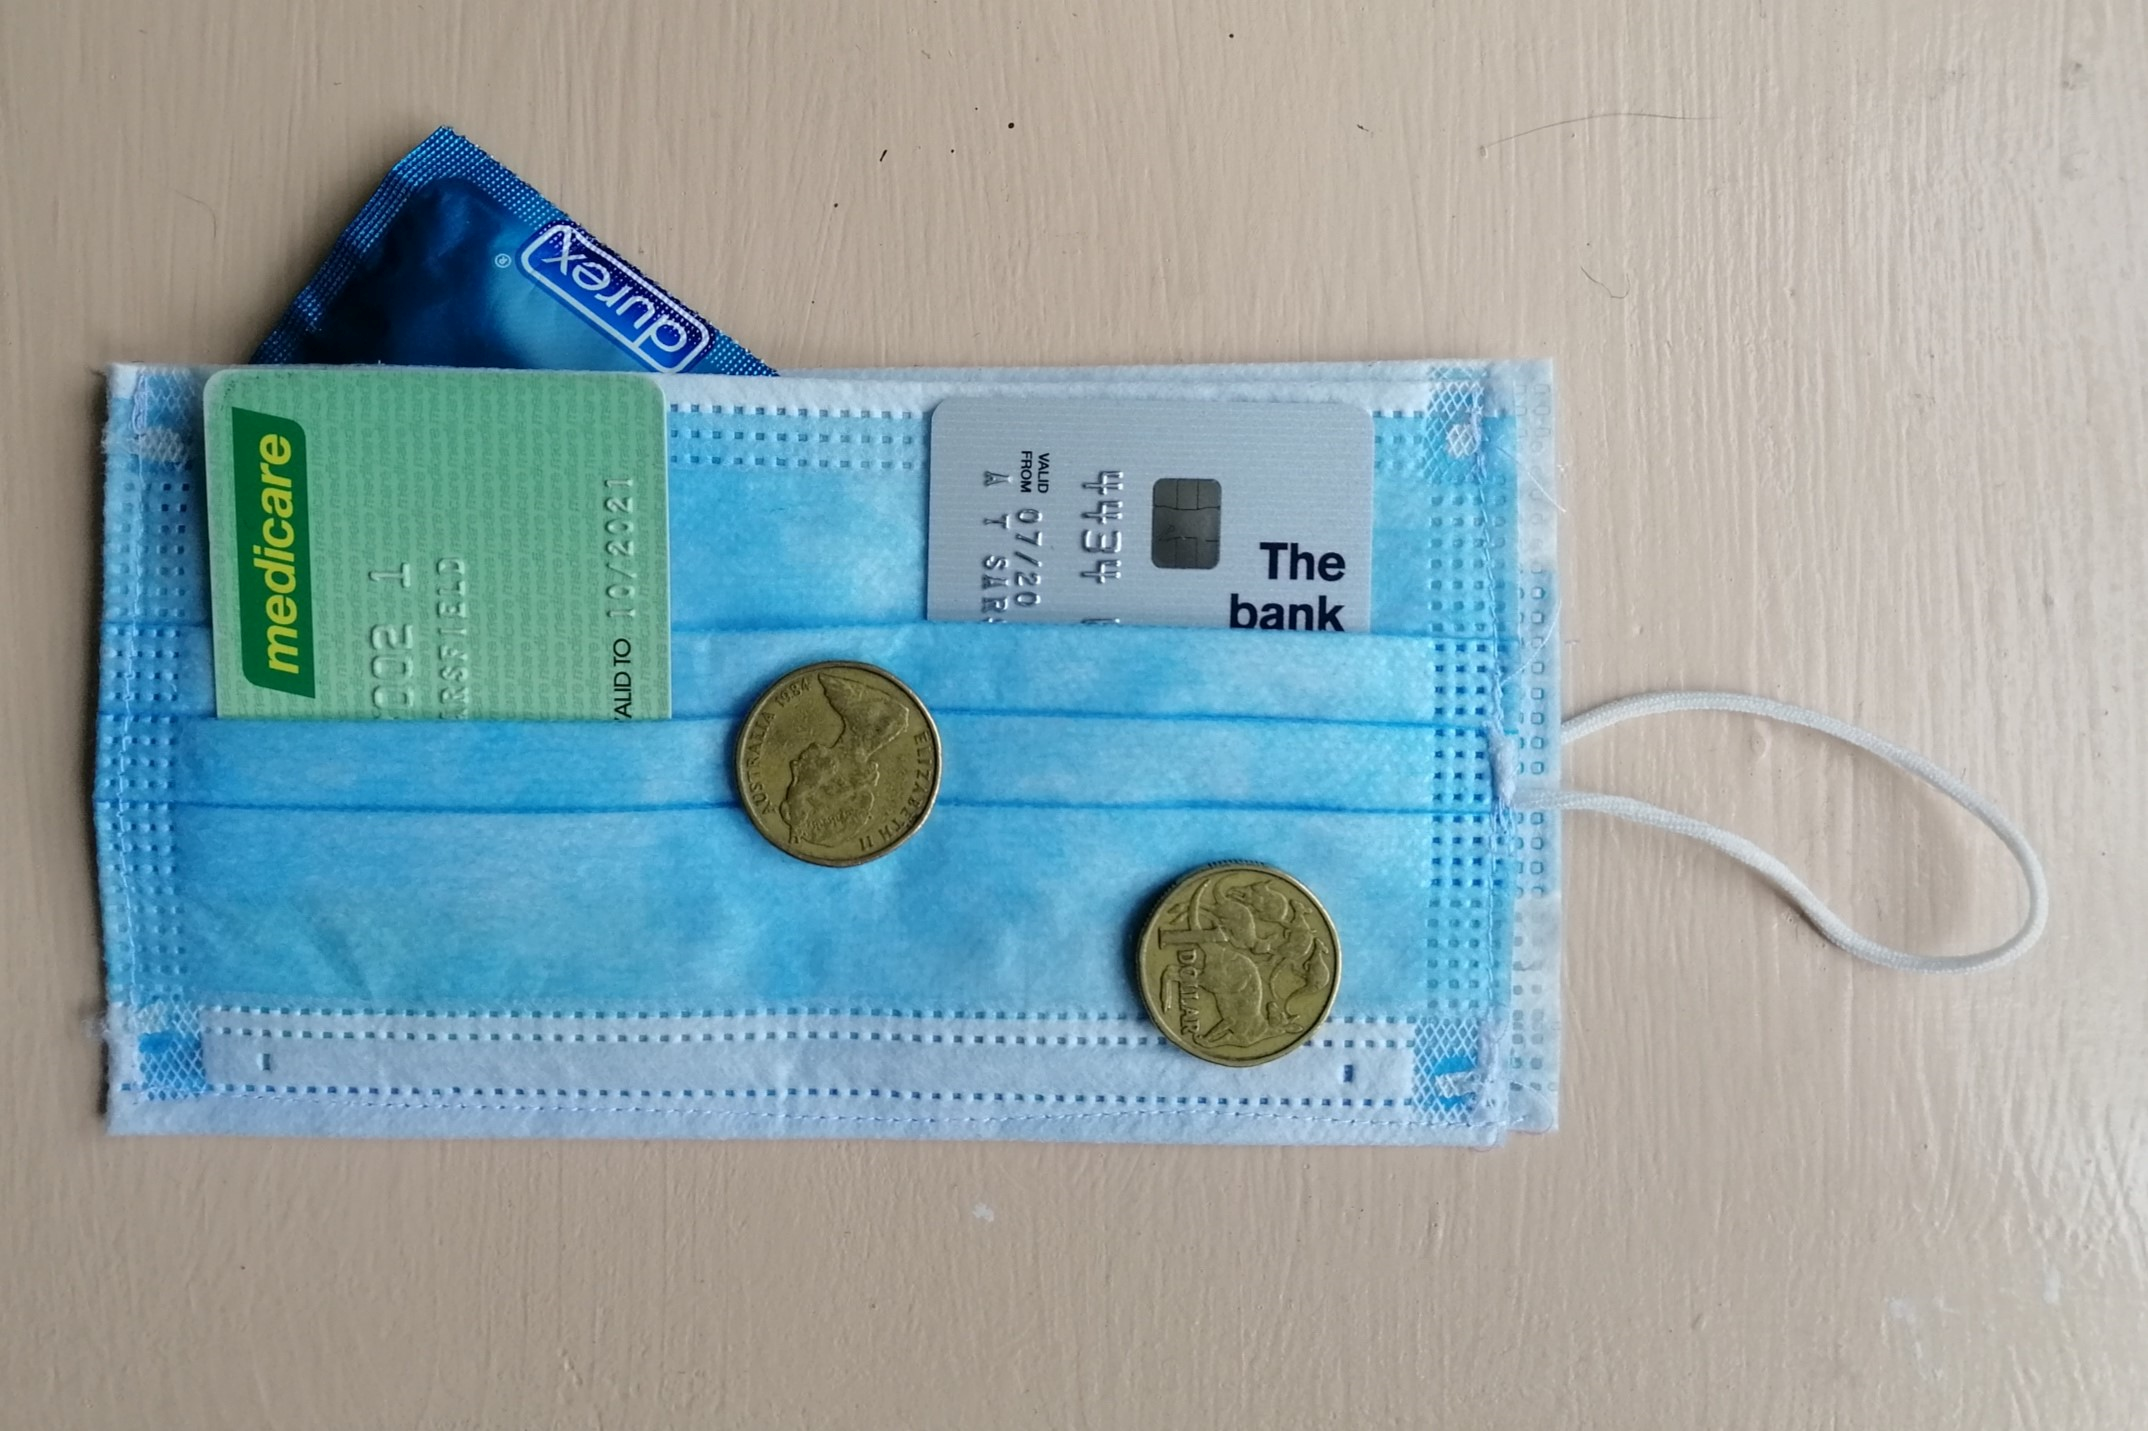 A wallet made from a surgical mask with cards and coins in it